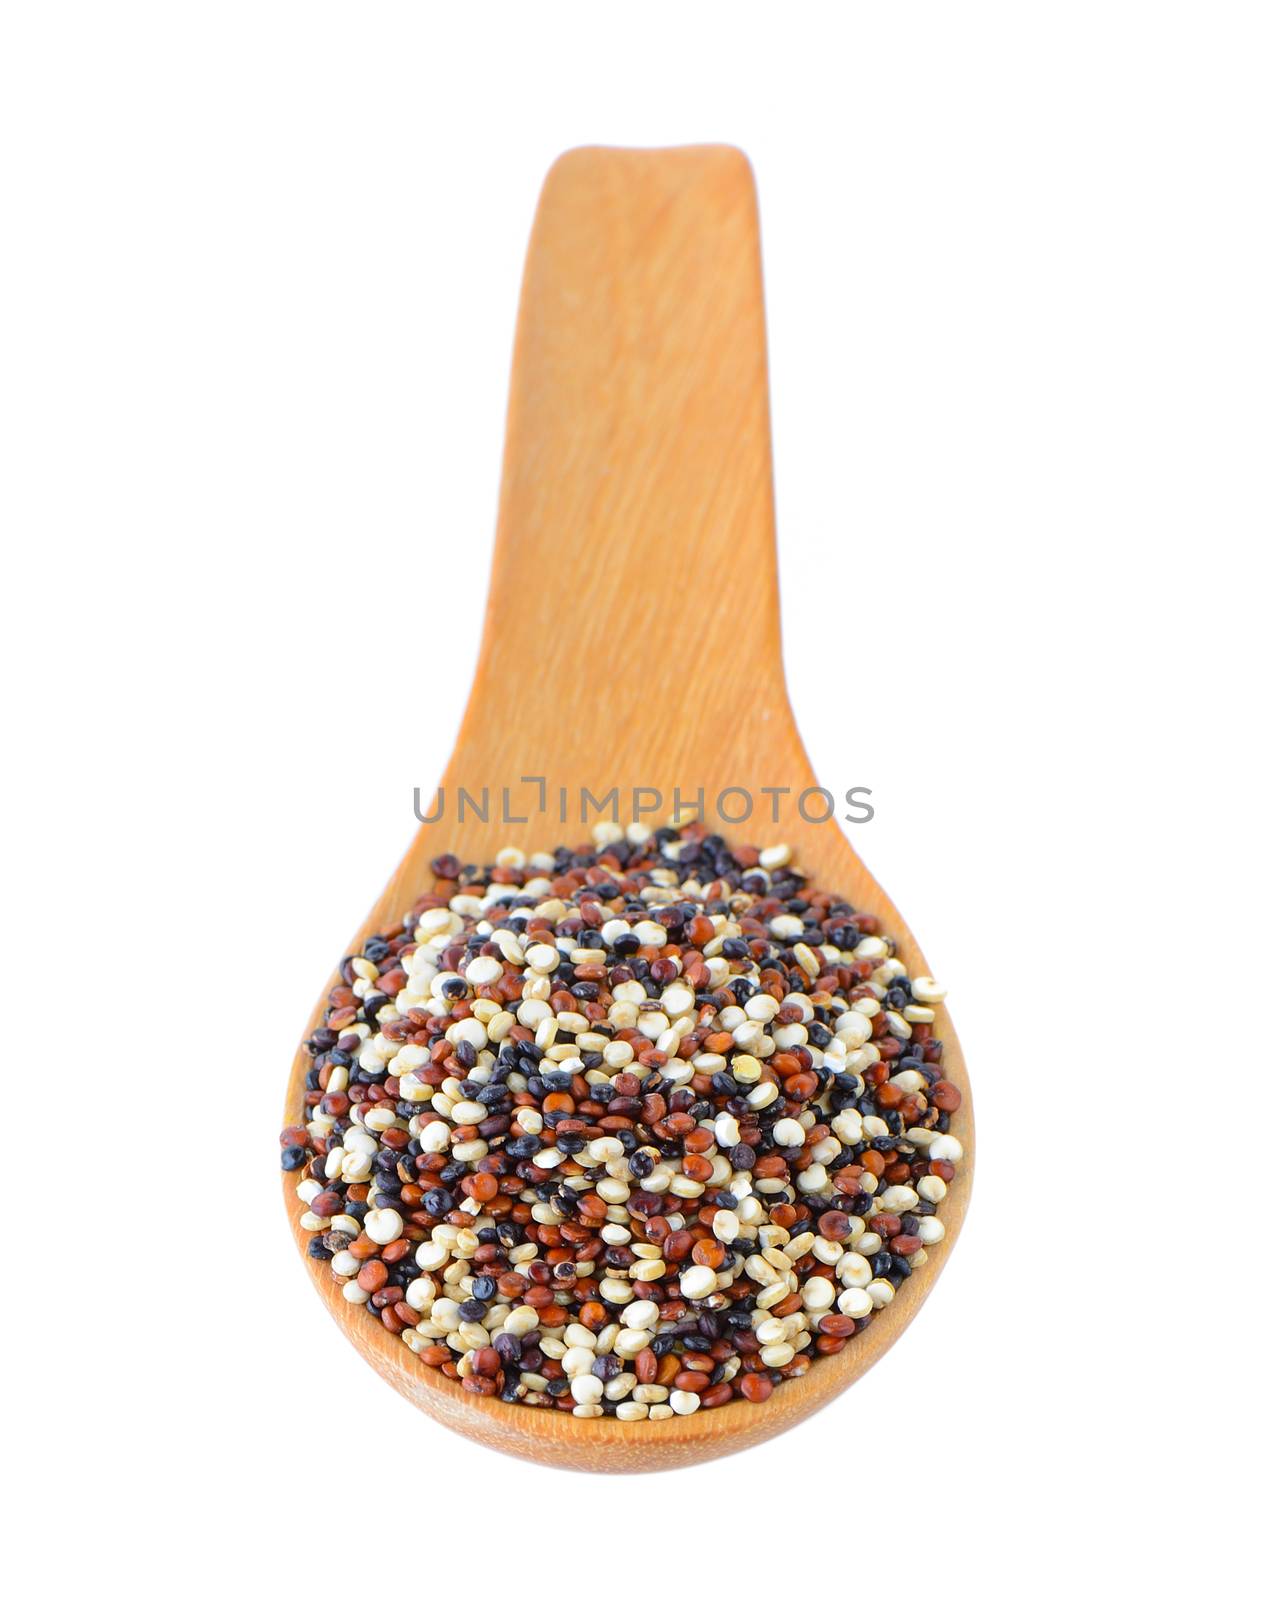 Quinoa seeds in wood spoon on white background by sommai